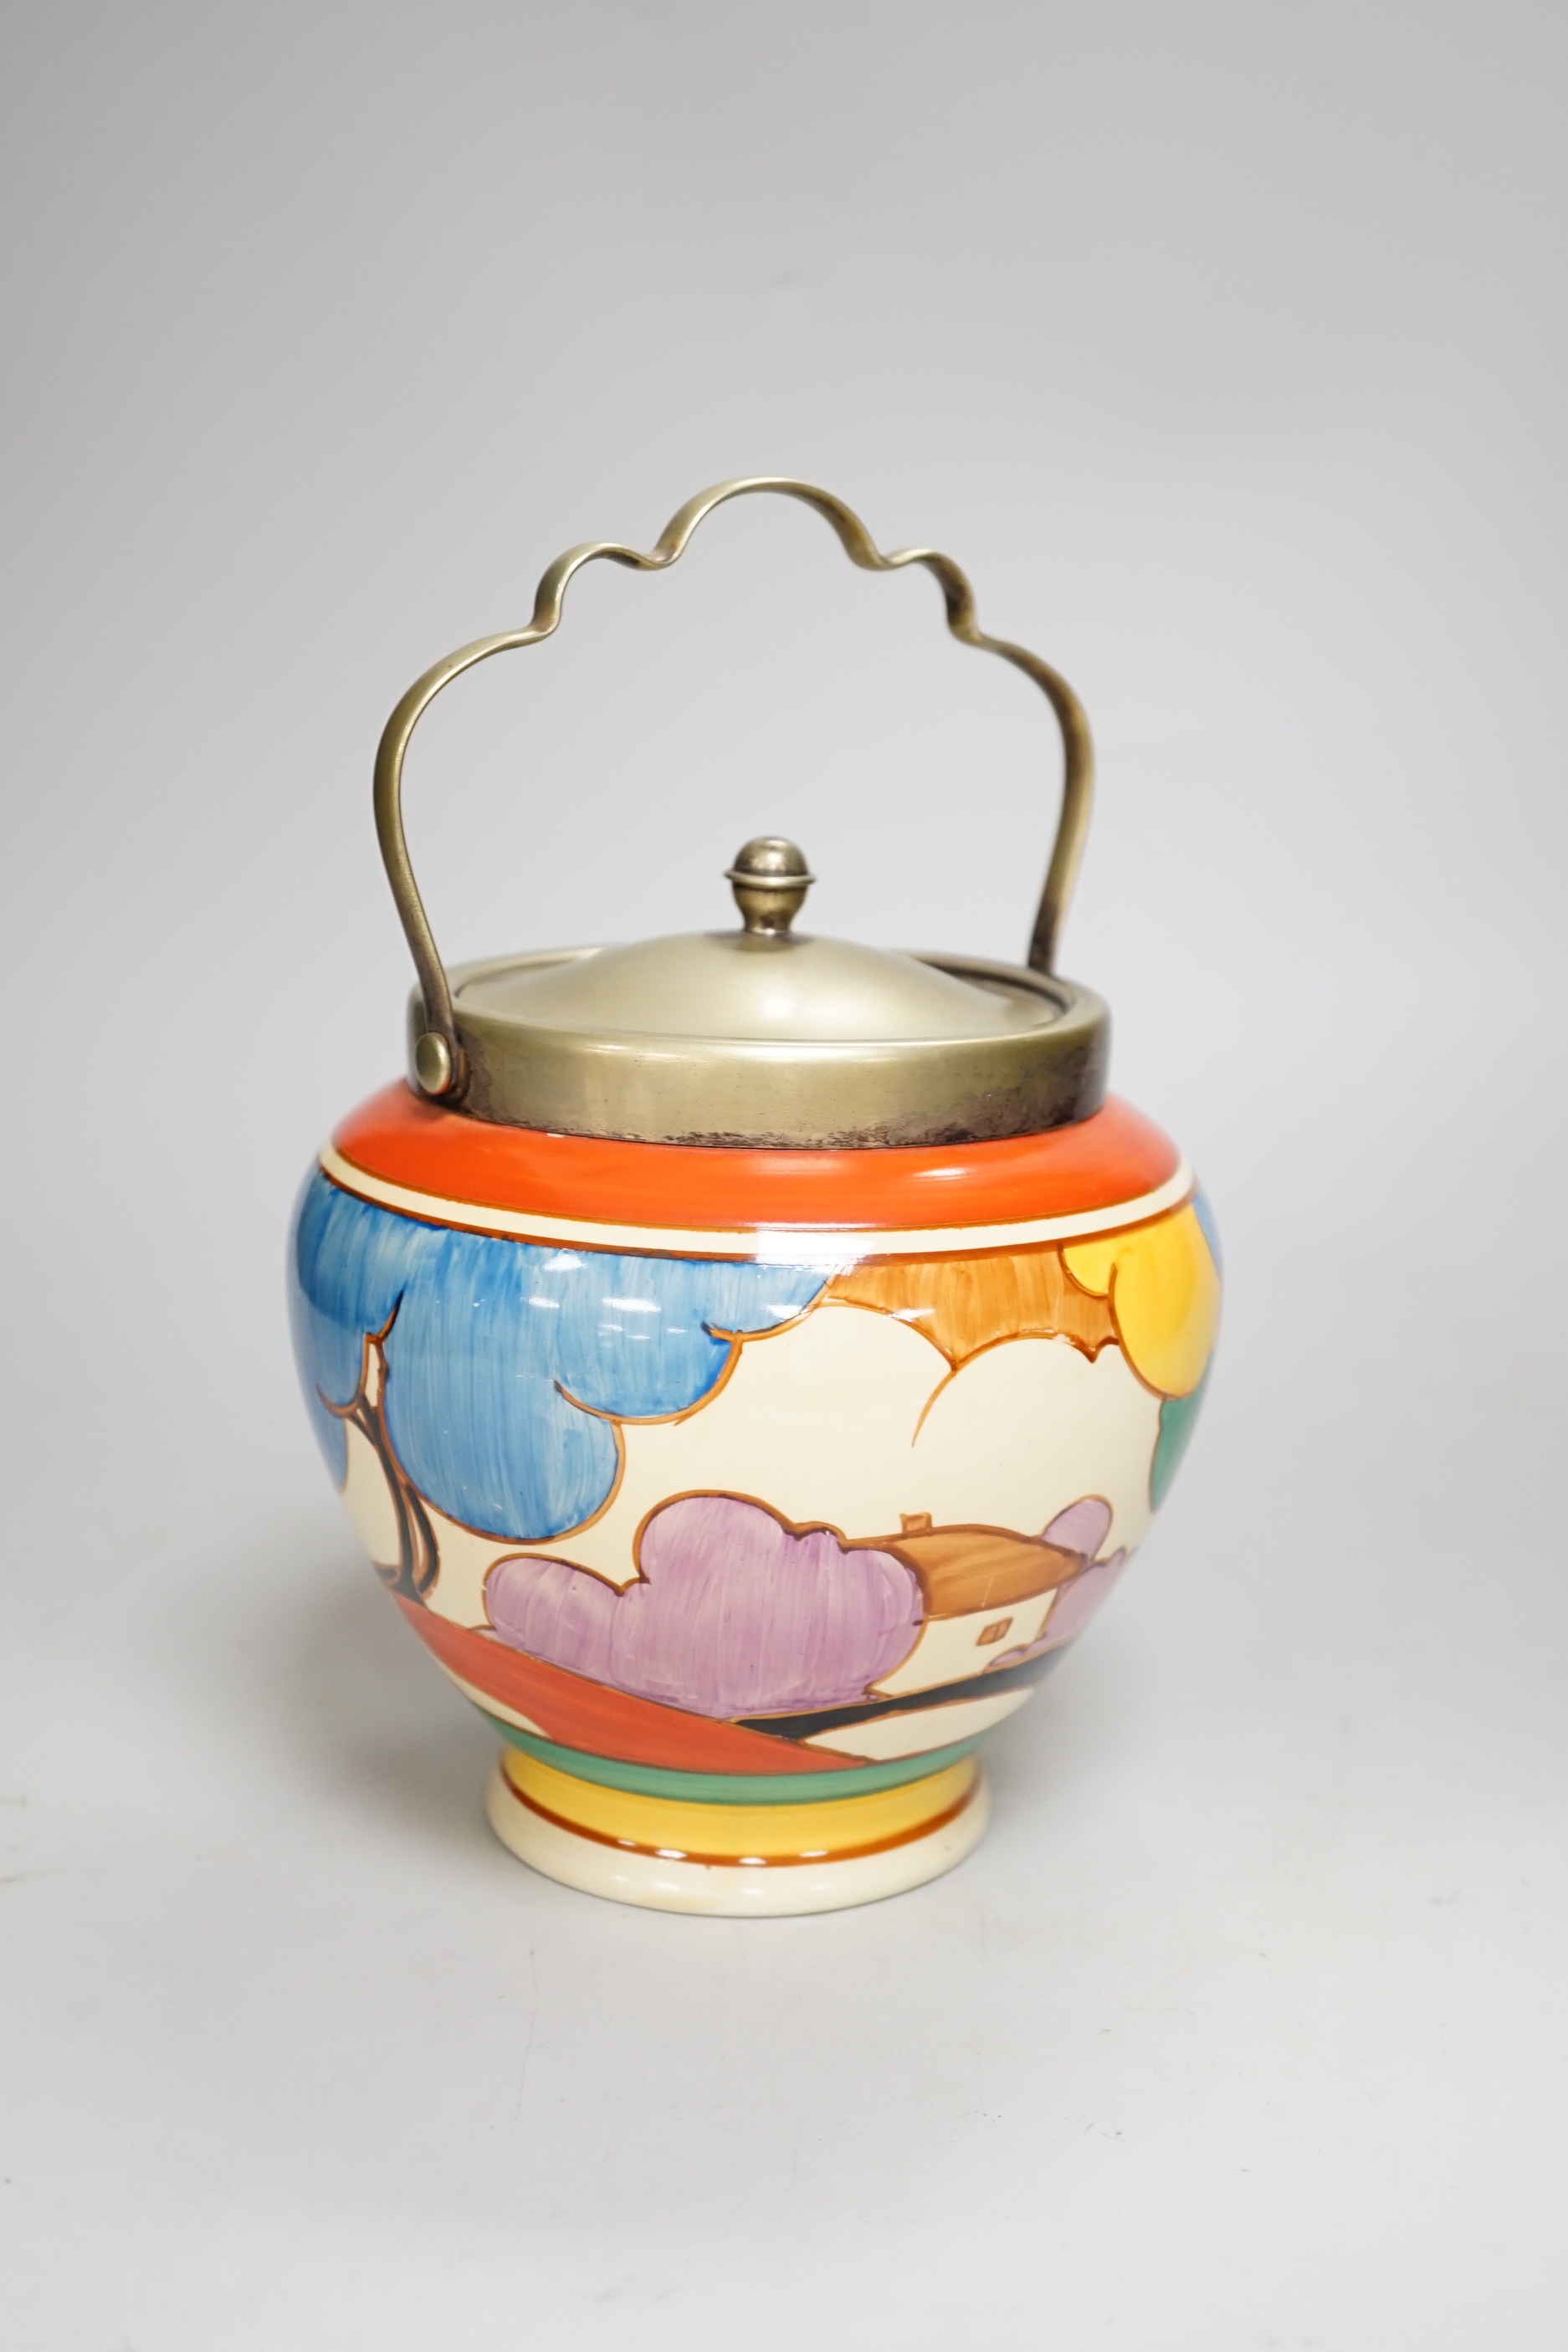 A Clarice Cliff biscuit jar, Blue Autumn, c.1931 with silver plated lid and swing handle, 21cm high